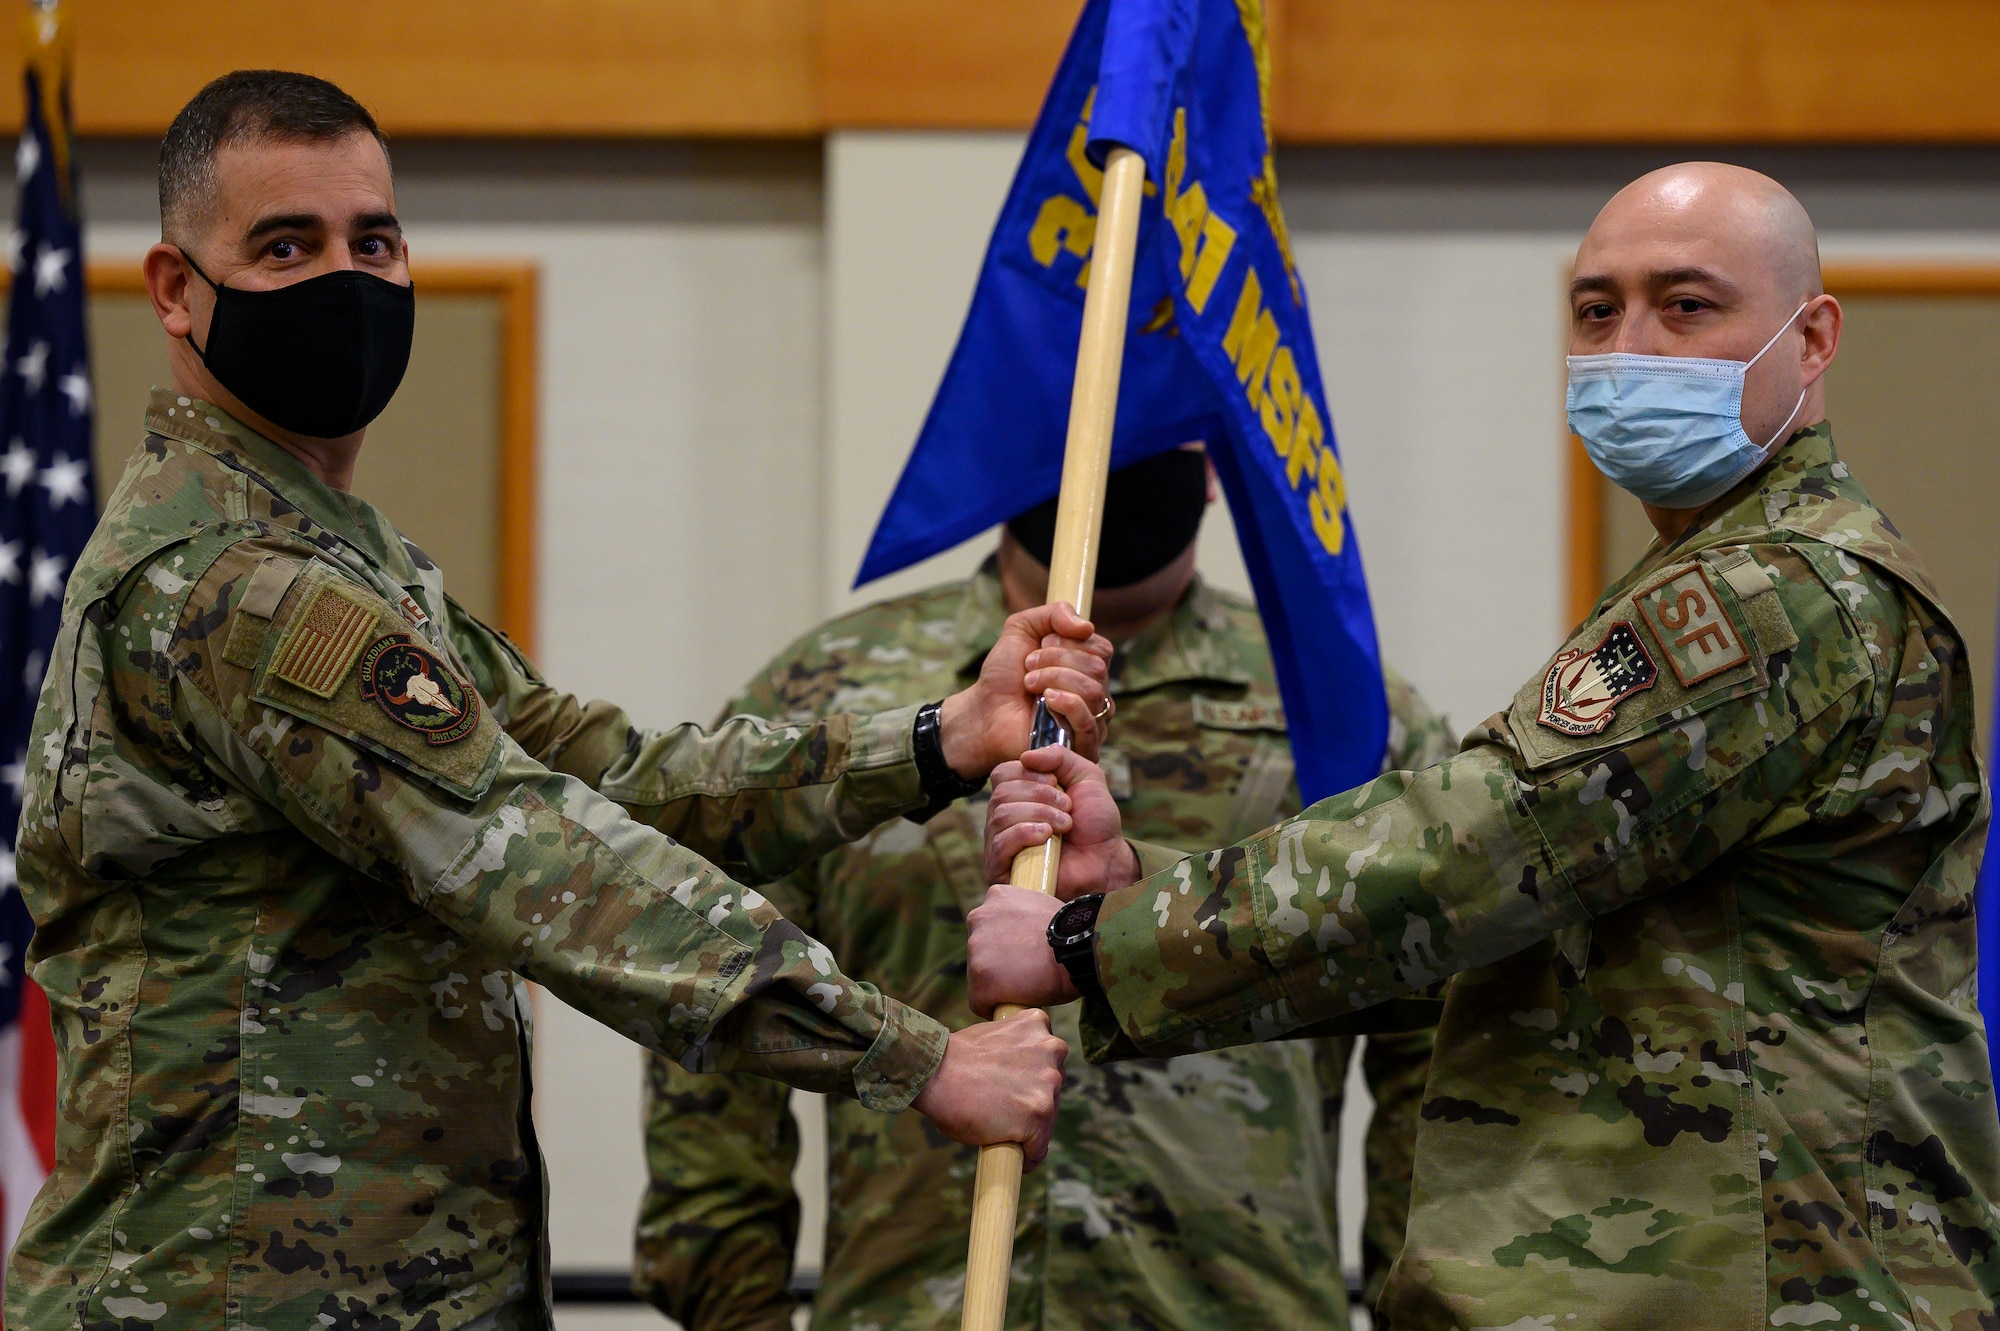 Maj. Anthony Langdon, right, accepts command of the 841st Missile Security Forces Squadron from Col. Frank Reyes, 341st Security Forces Group commander, during a change of command ceremony May 11, 2021, at Malmstrom Air Force Base, Mont.